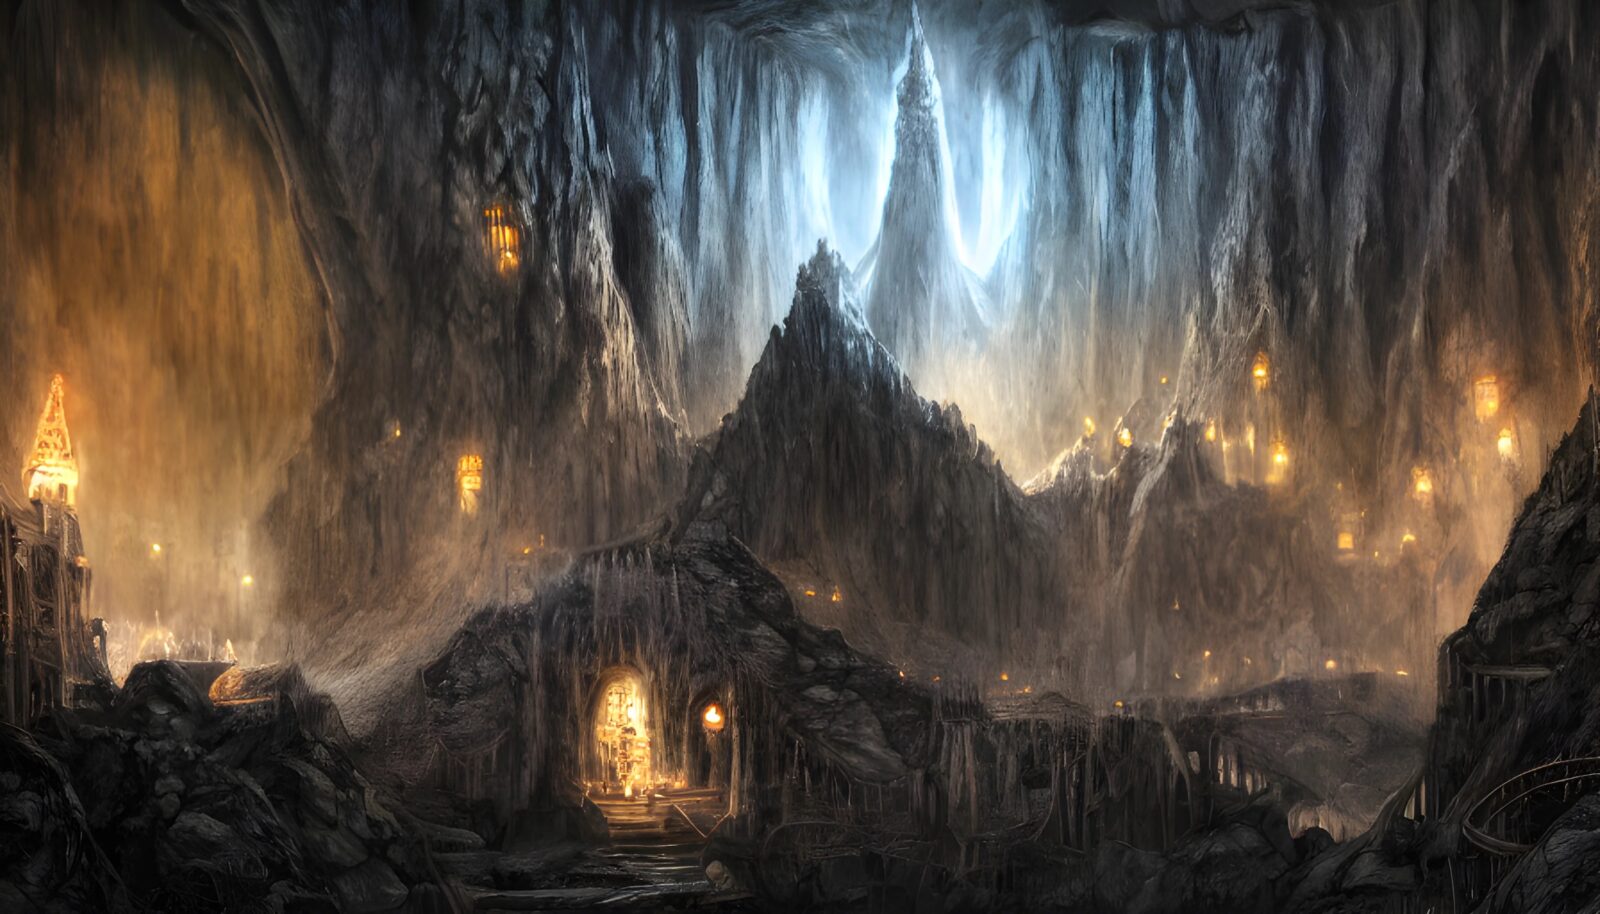 Can You Pass This Numbers-Only General Knowledge Quiz? The Mines of Moria (The Lord of the Rings)